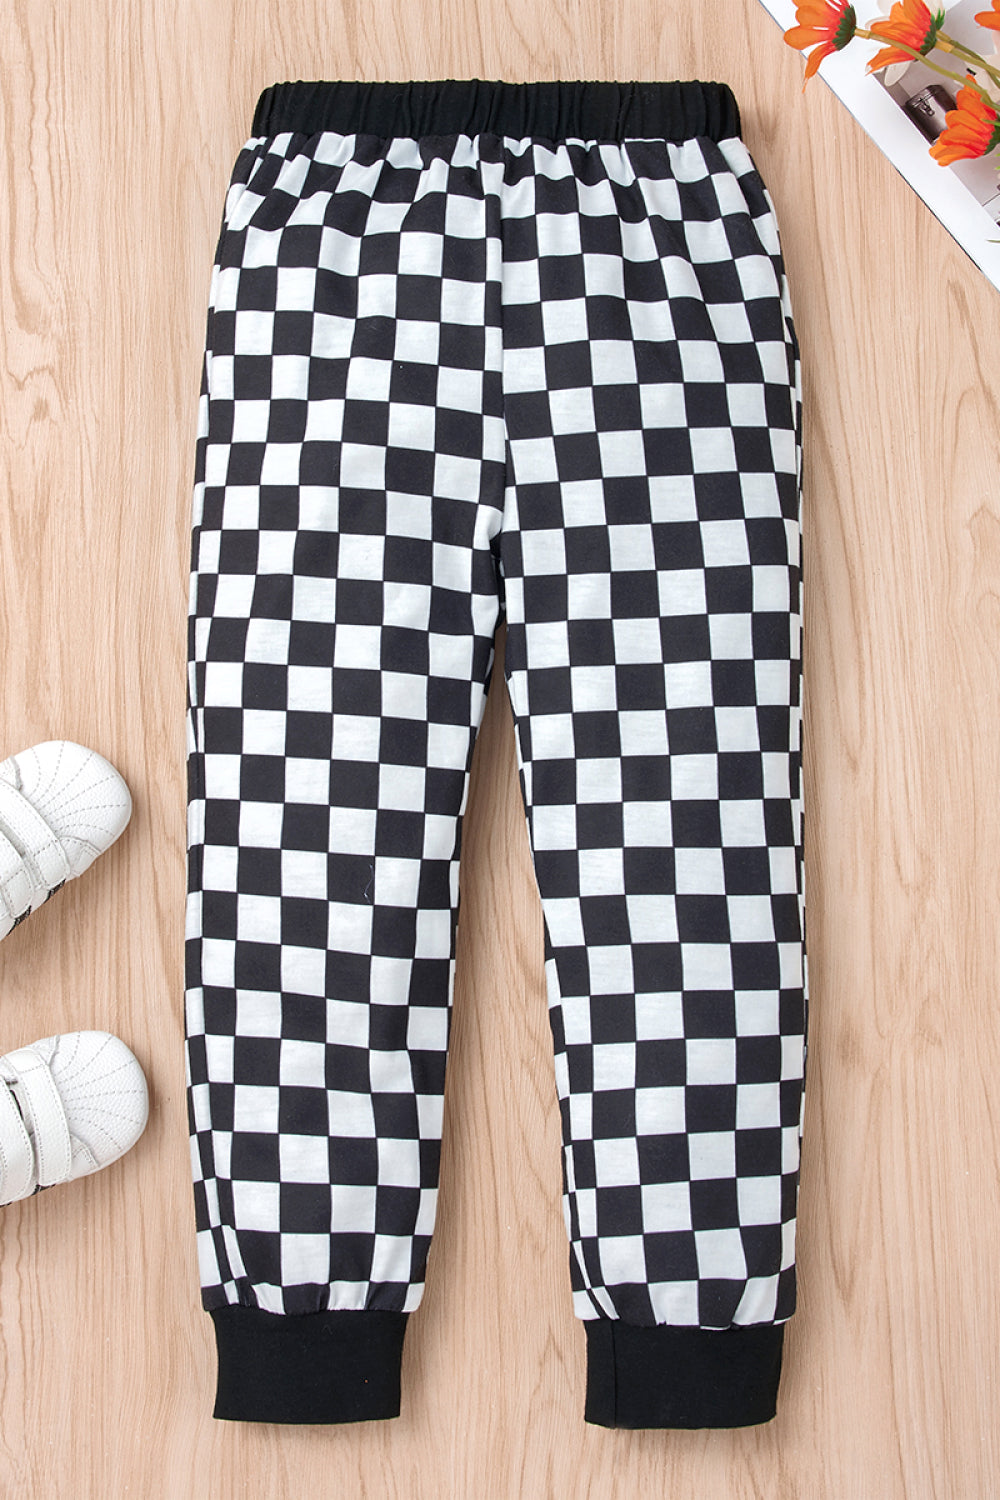 Girls Crop Top and Tank Top and Checkered Pants Three Piece Set